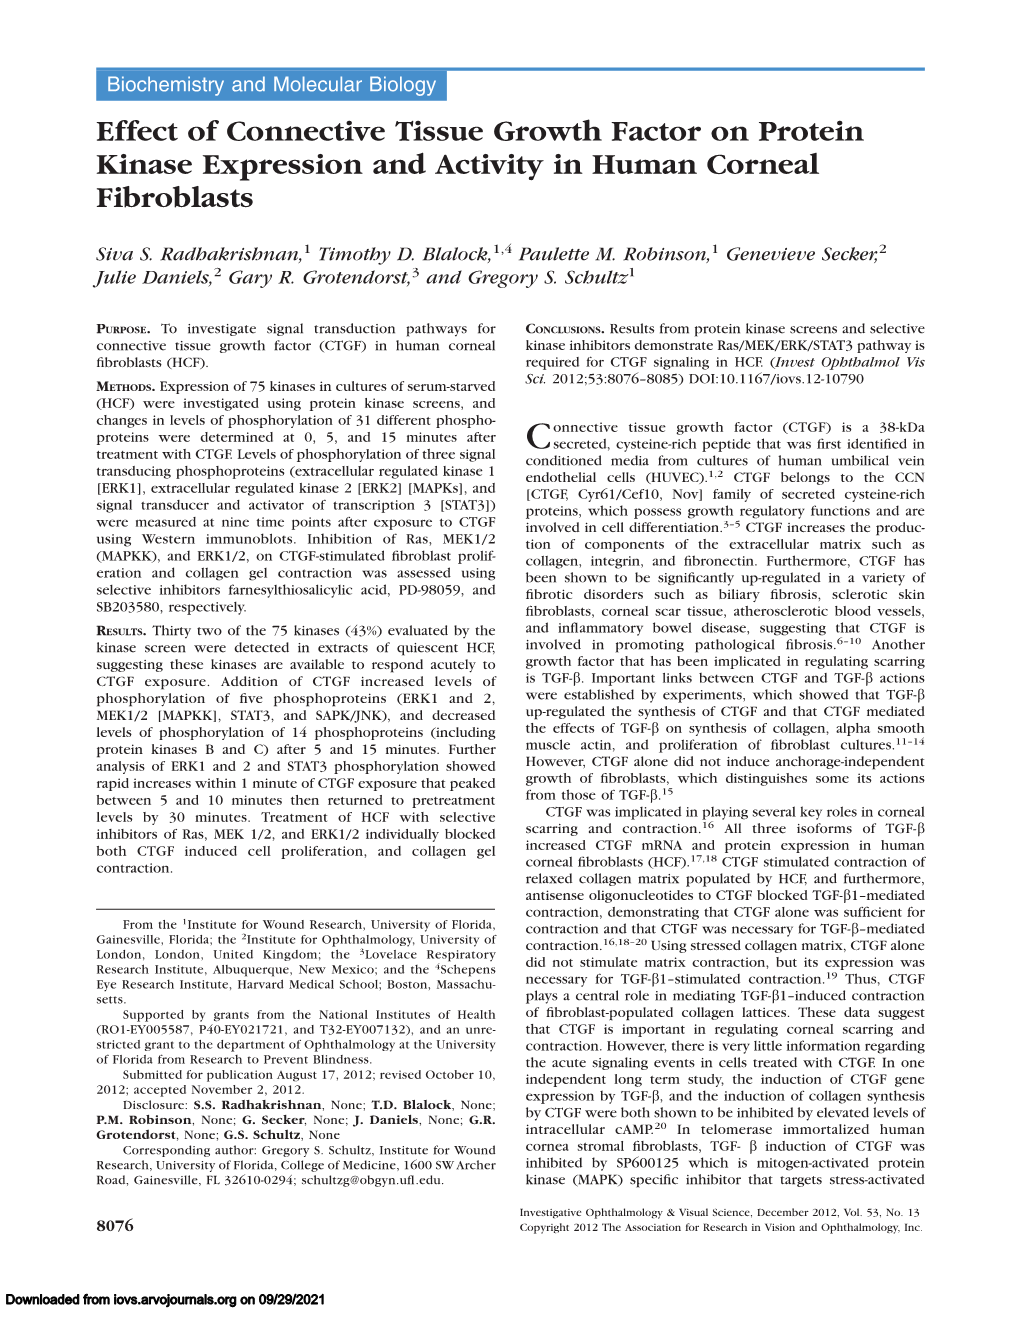 Effect of Connective Tissue Growth Factor on Protein Kinase Expression and Activity in Human Corneal Fibroblasts